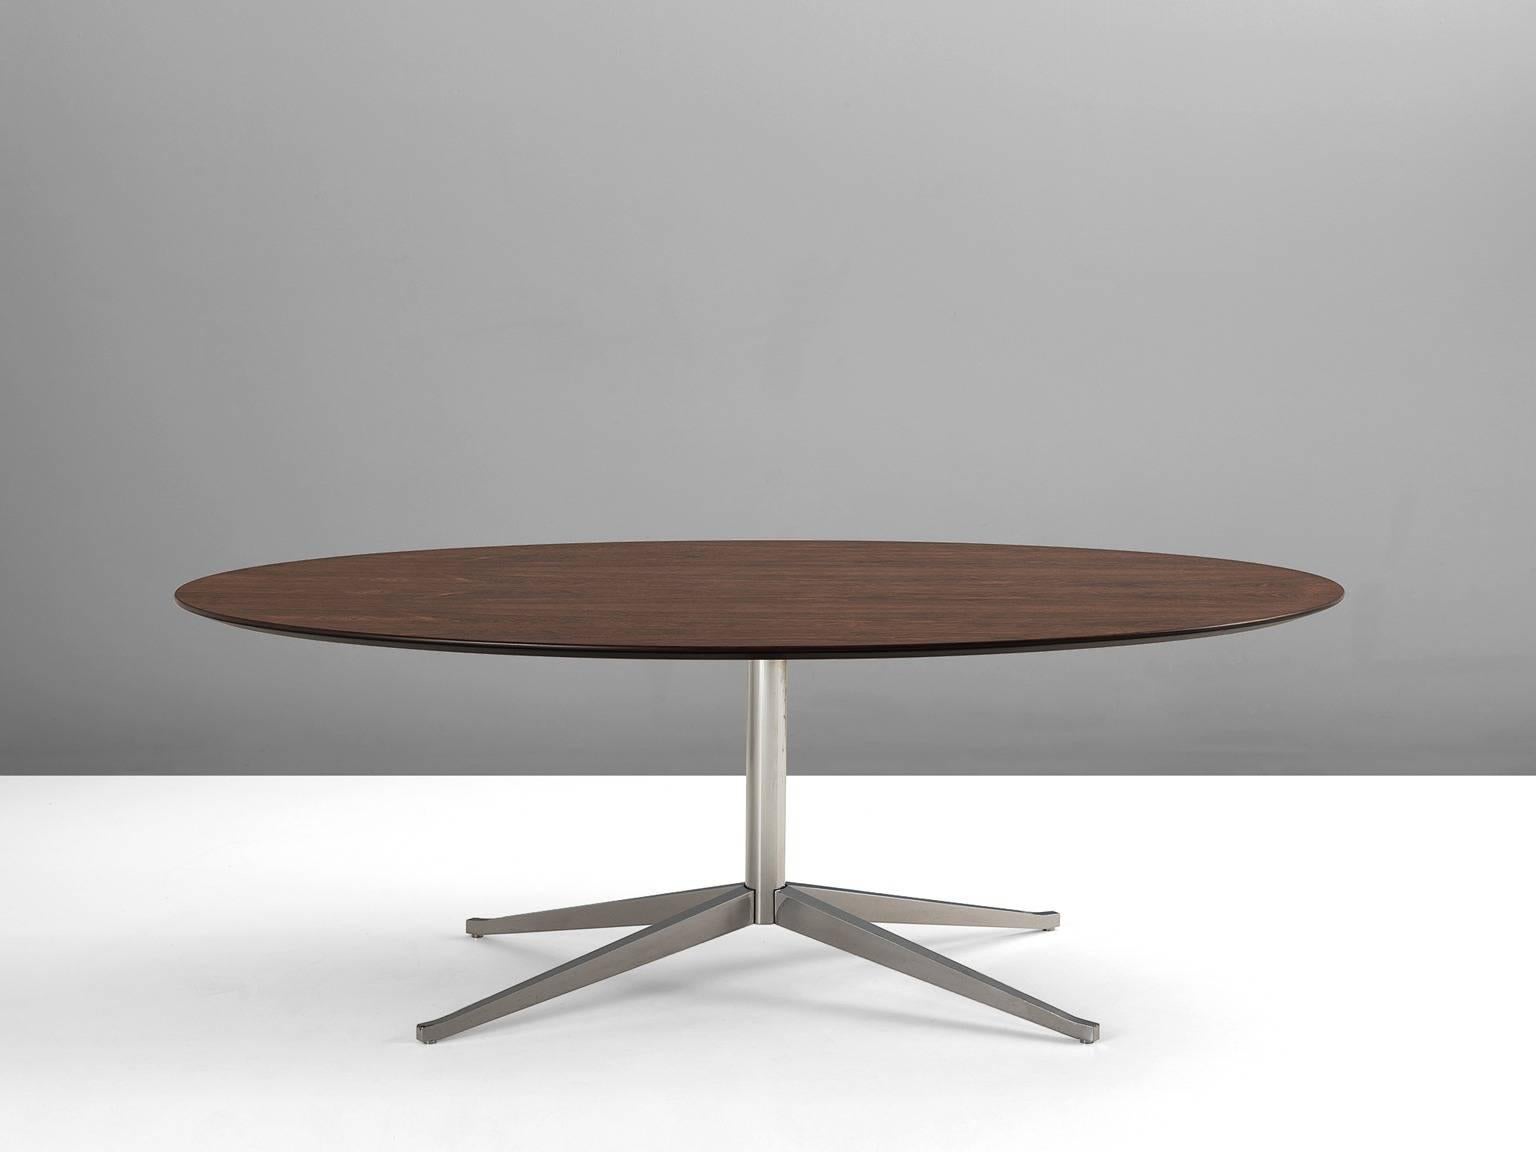 Dining table, in metal and rosewood, by Florence Knoll for Knoll International, United States, 1960s. 

Large oval dining table by Florence Knoll. This table consist of a chromed metal base with one column and four legs. The legs combine into an